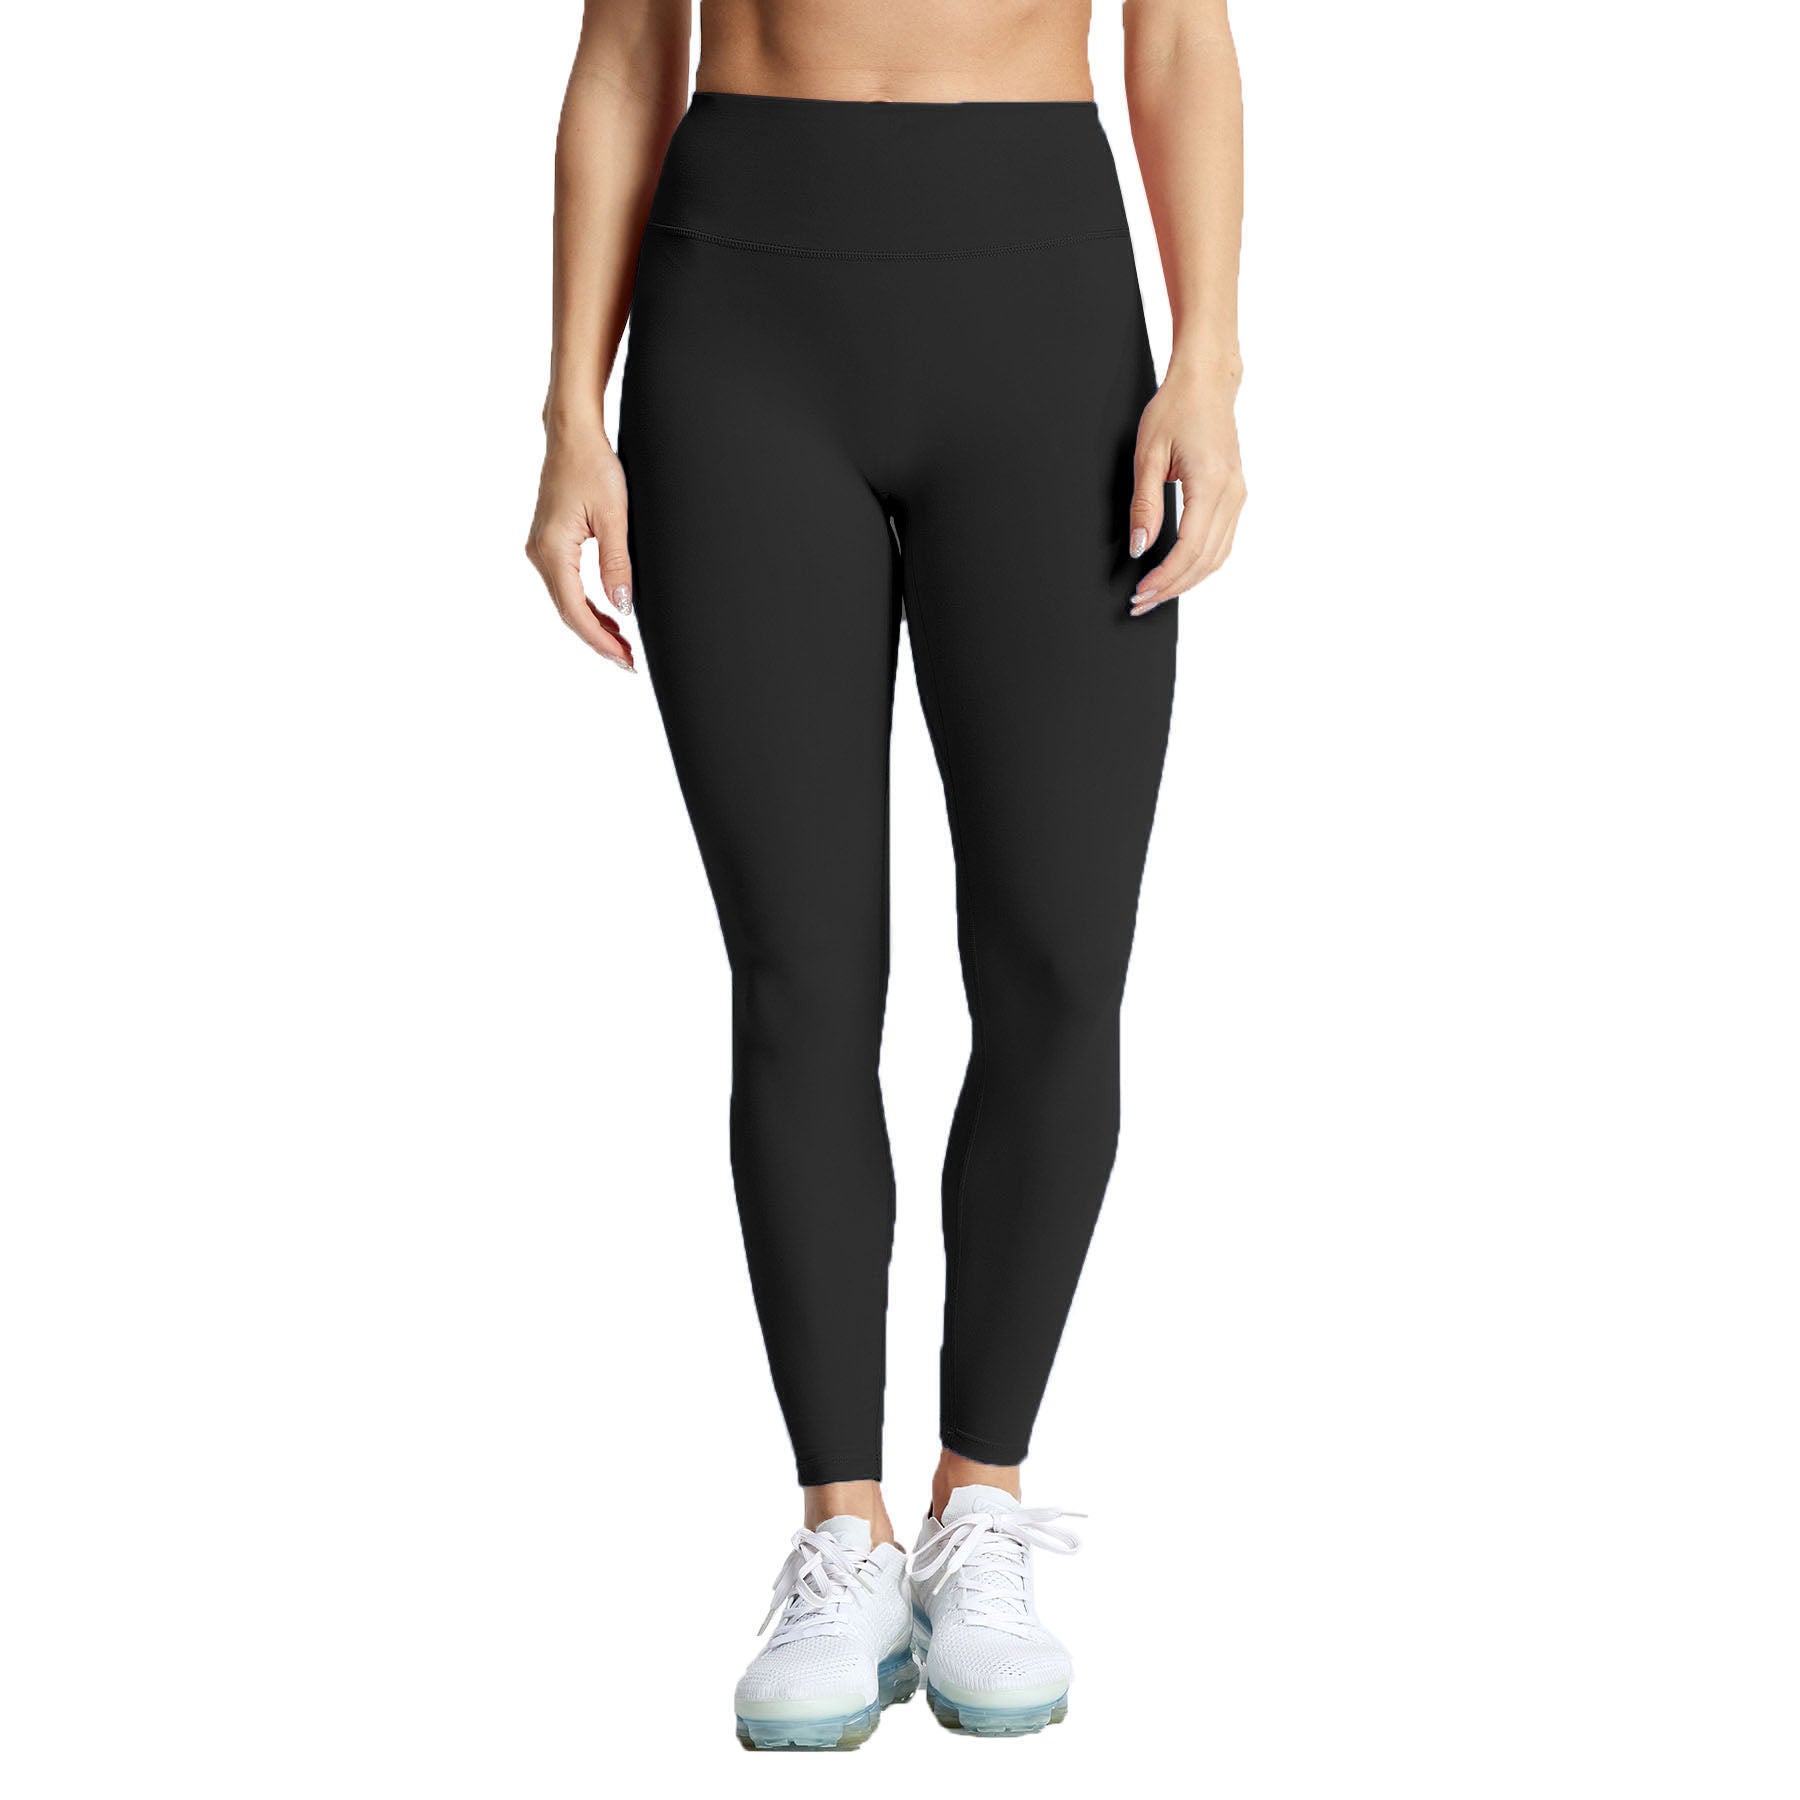 Aoxjox Women's High Waisted Yoga Pants Trinity No Front Seam Full